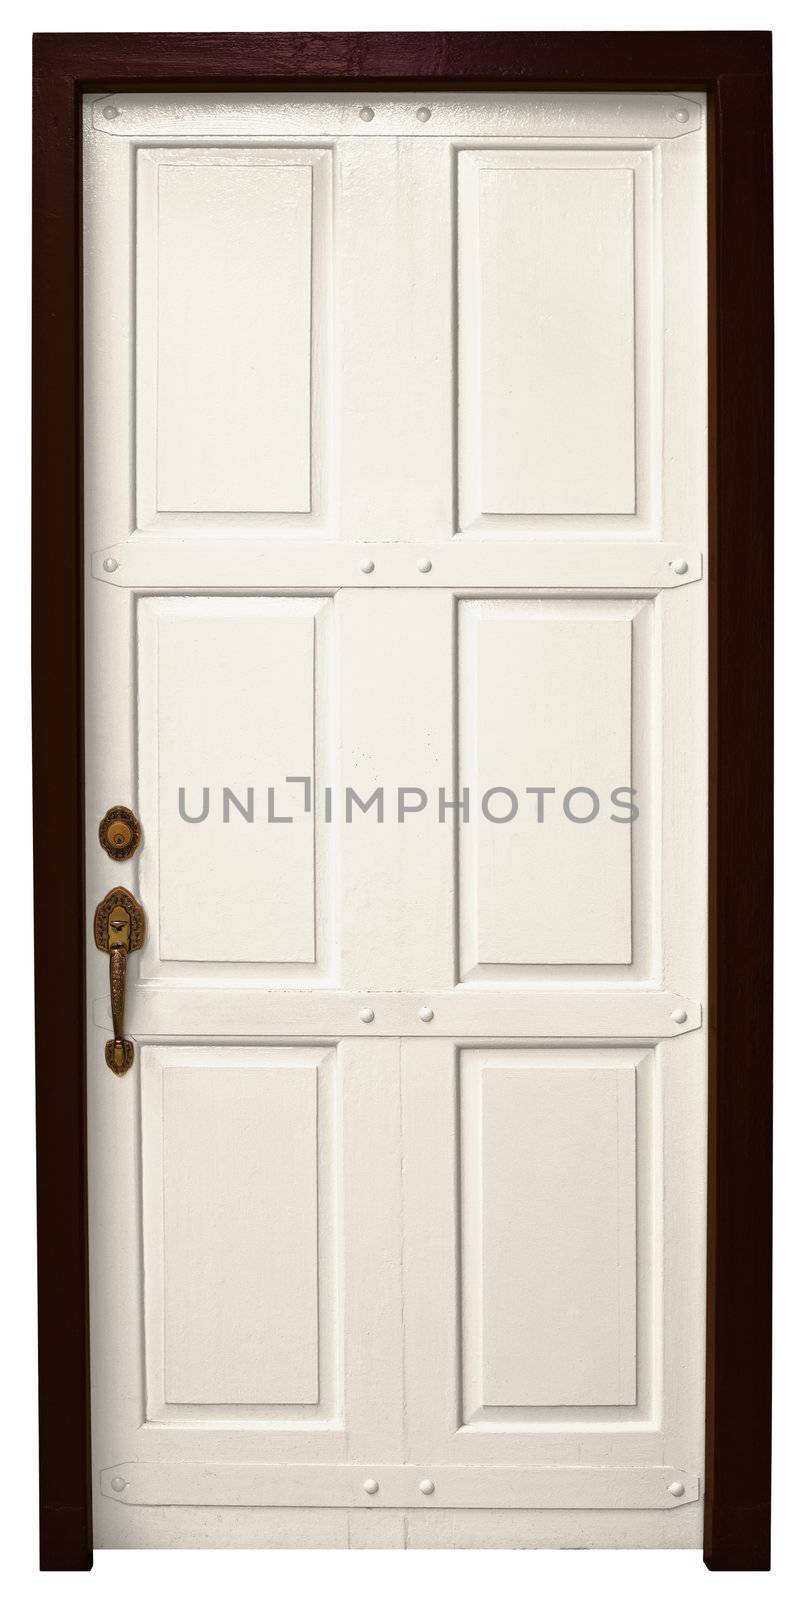 An ordinary wooden door isolated on white background